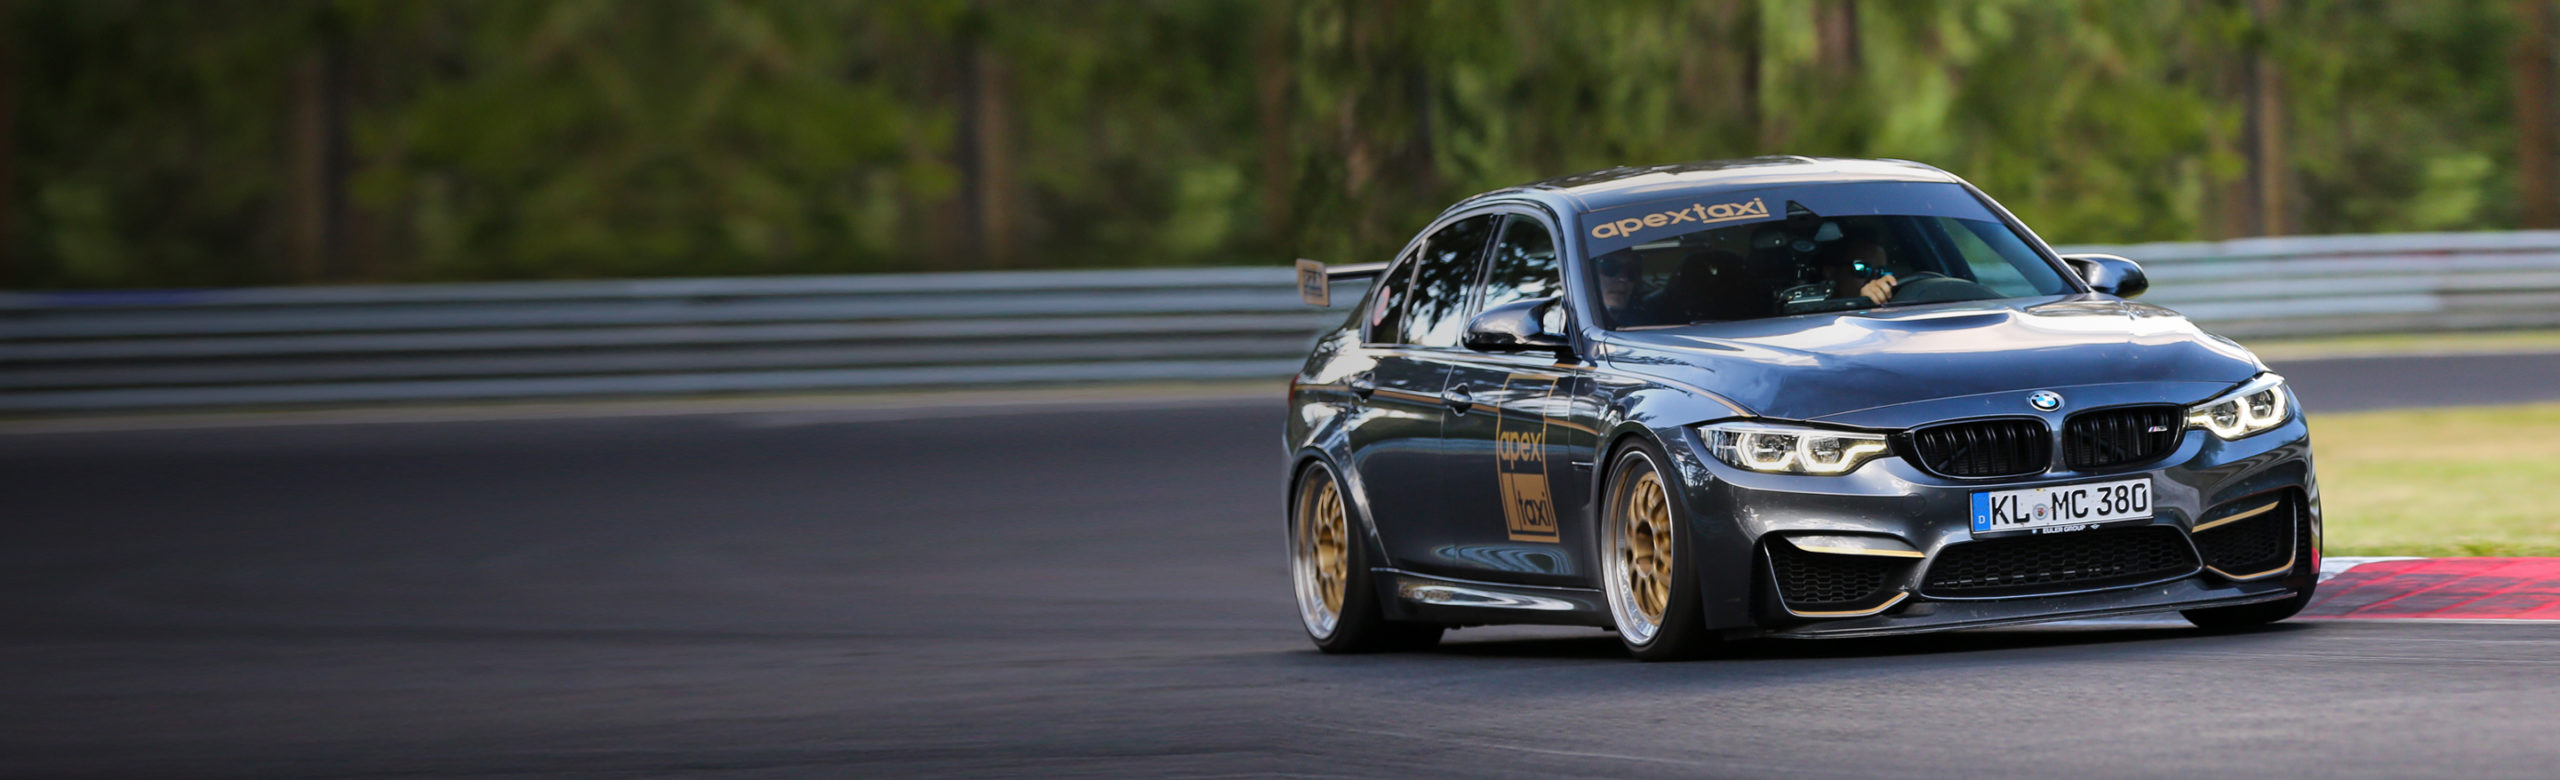 With the Nürburgring Taxi you can have the lap of a lifetime